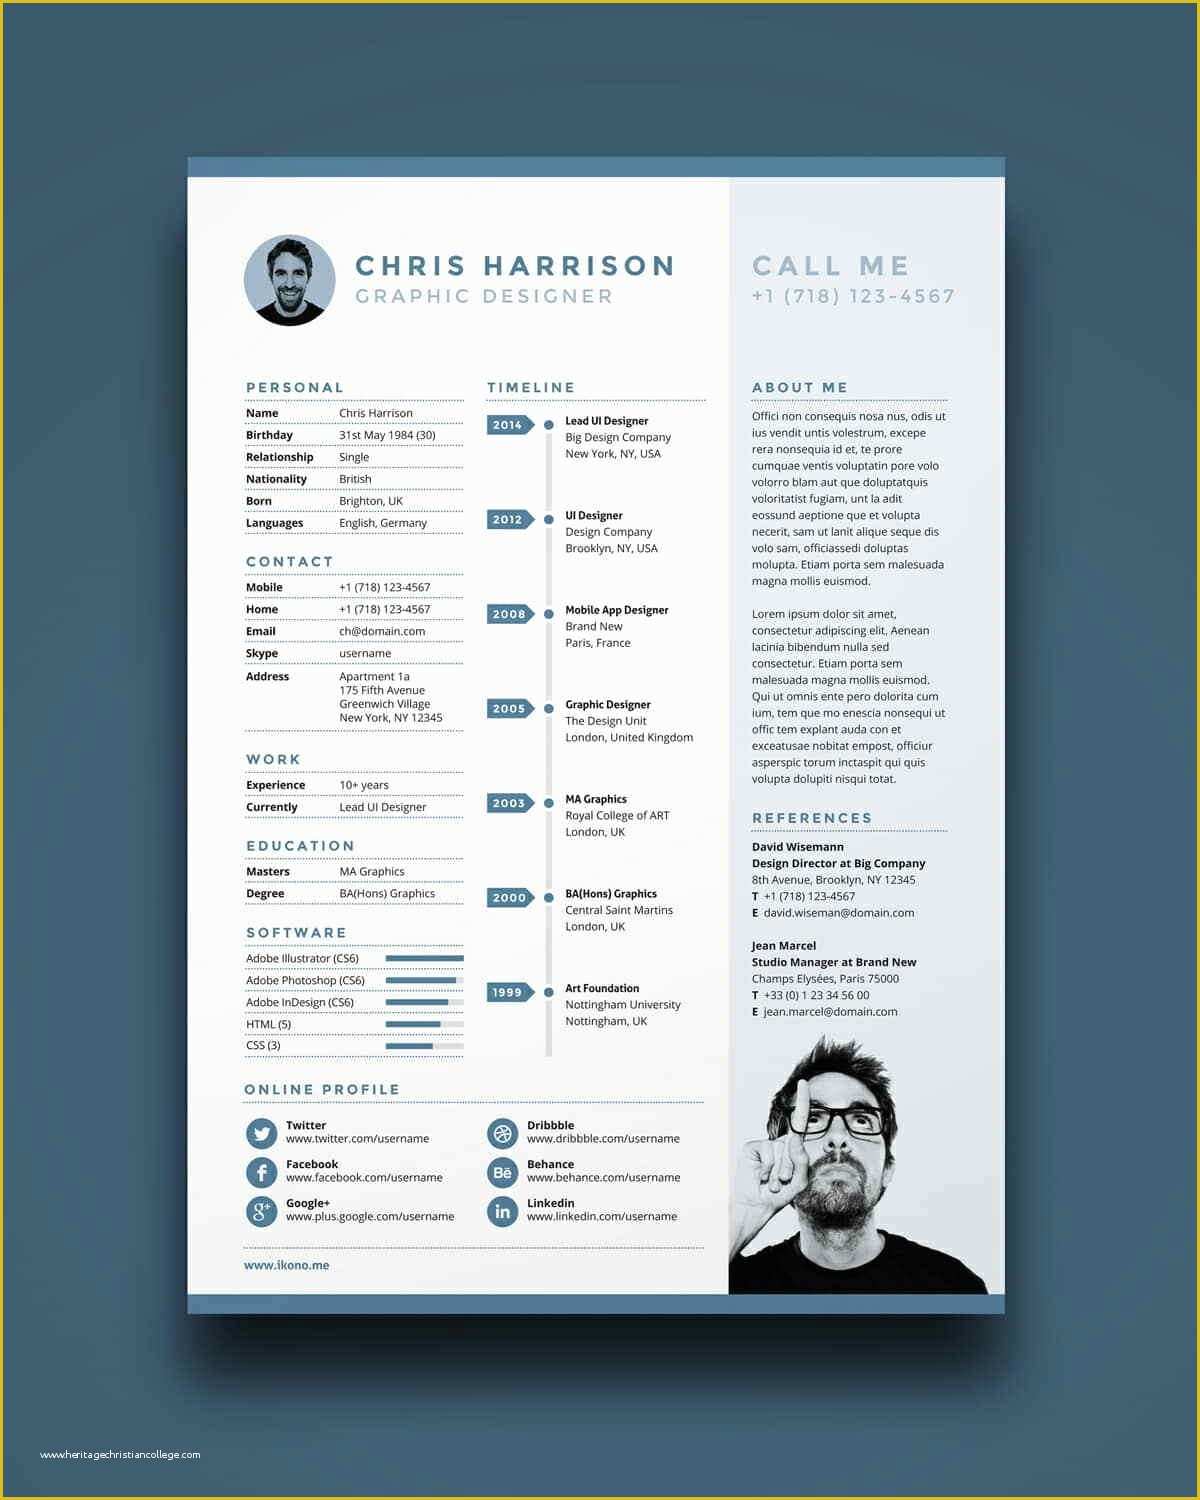 Free Resume Website Templates Download Of Free Resume Templates 17 Free Cv Templates to Download & Use